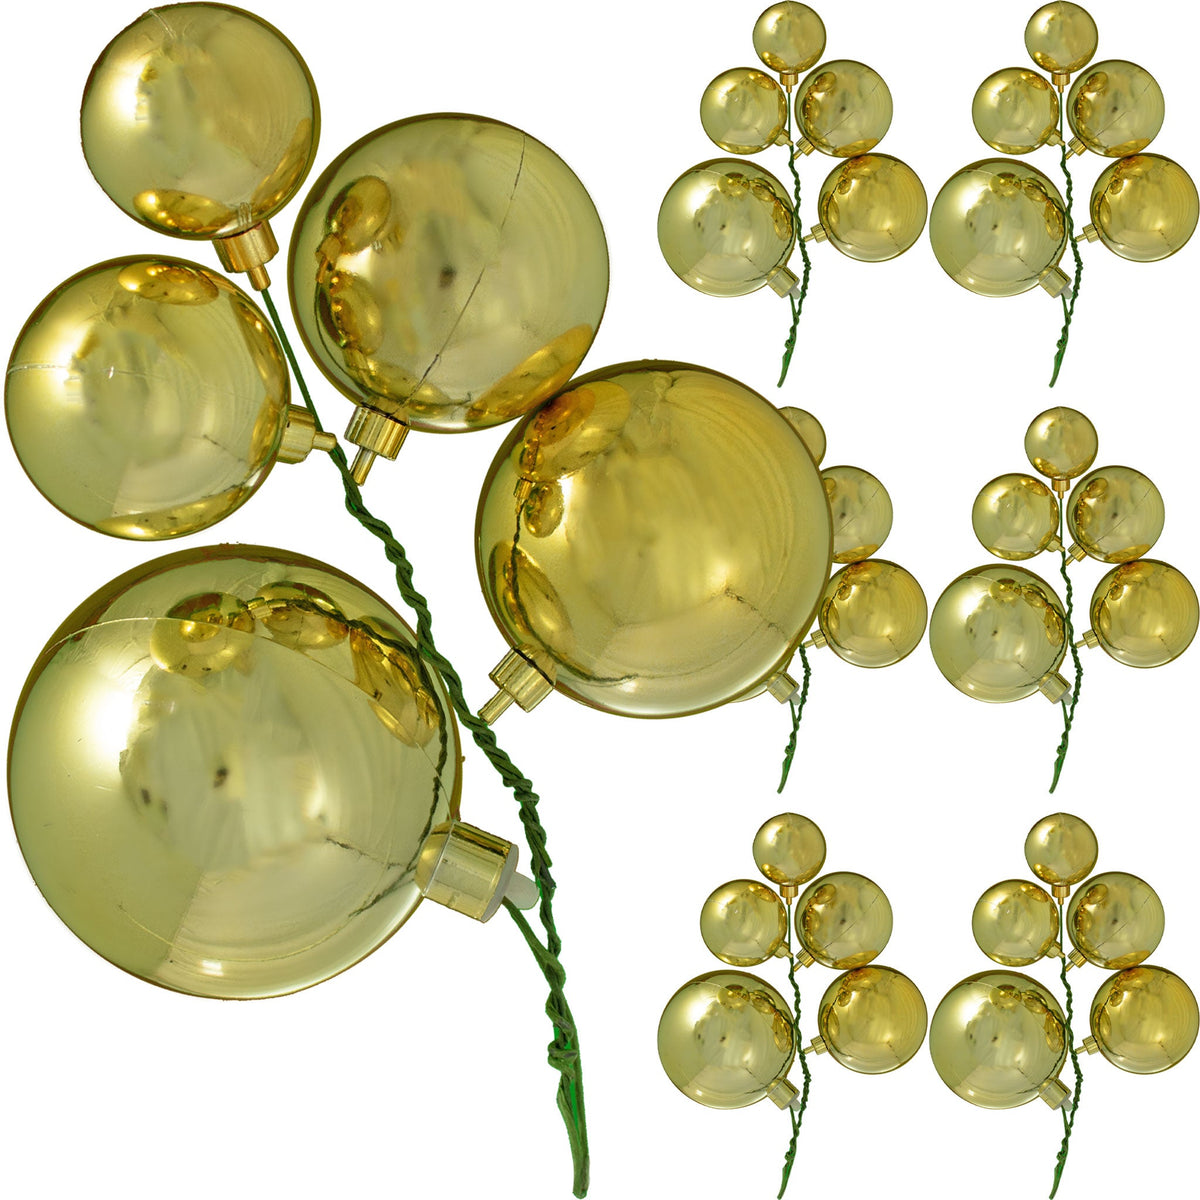 Classic Christmas Ball Clusters with Shiny Gold Ornaments are perfect for decorating your Christmas Tree.  Sold in sets of 6 from leedisplay.com